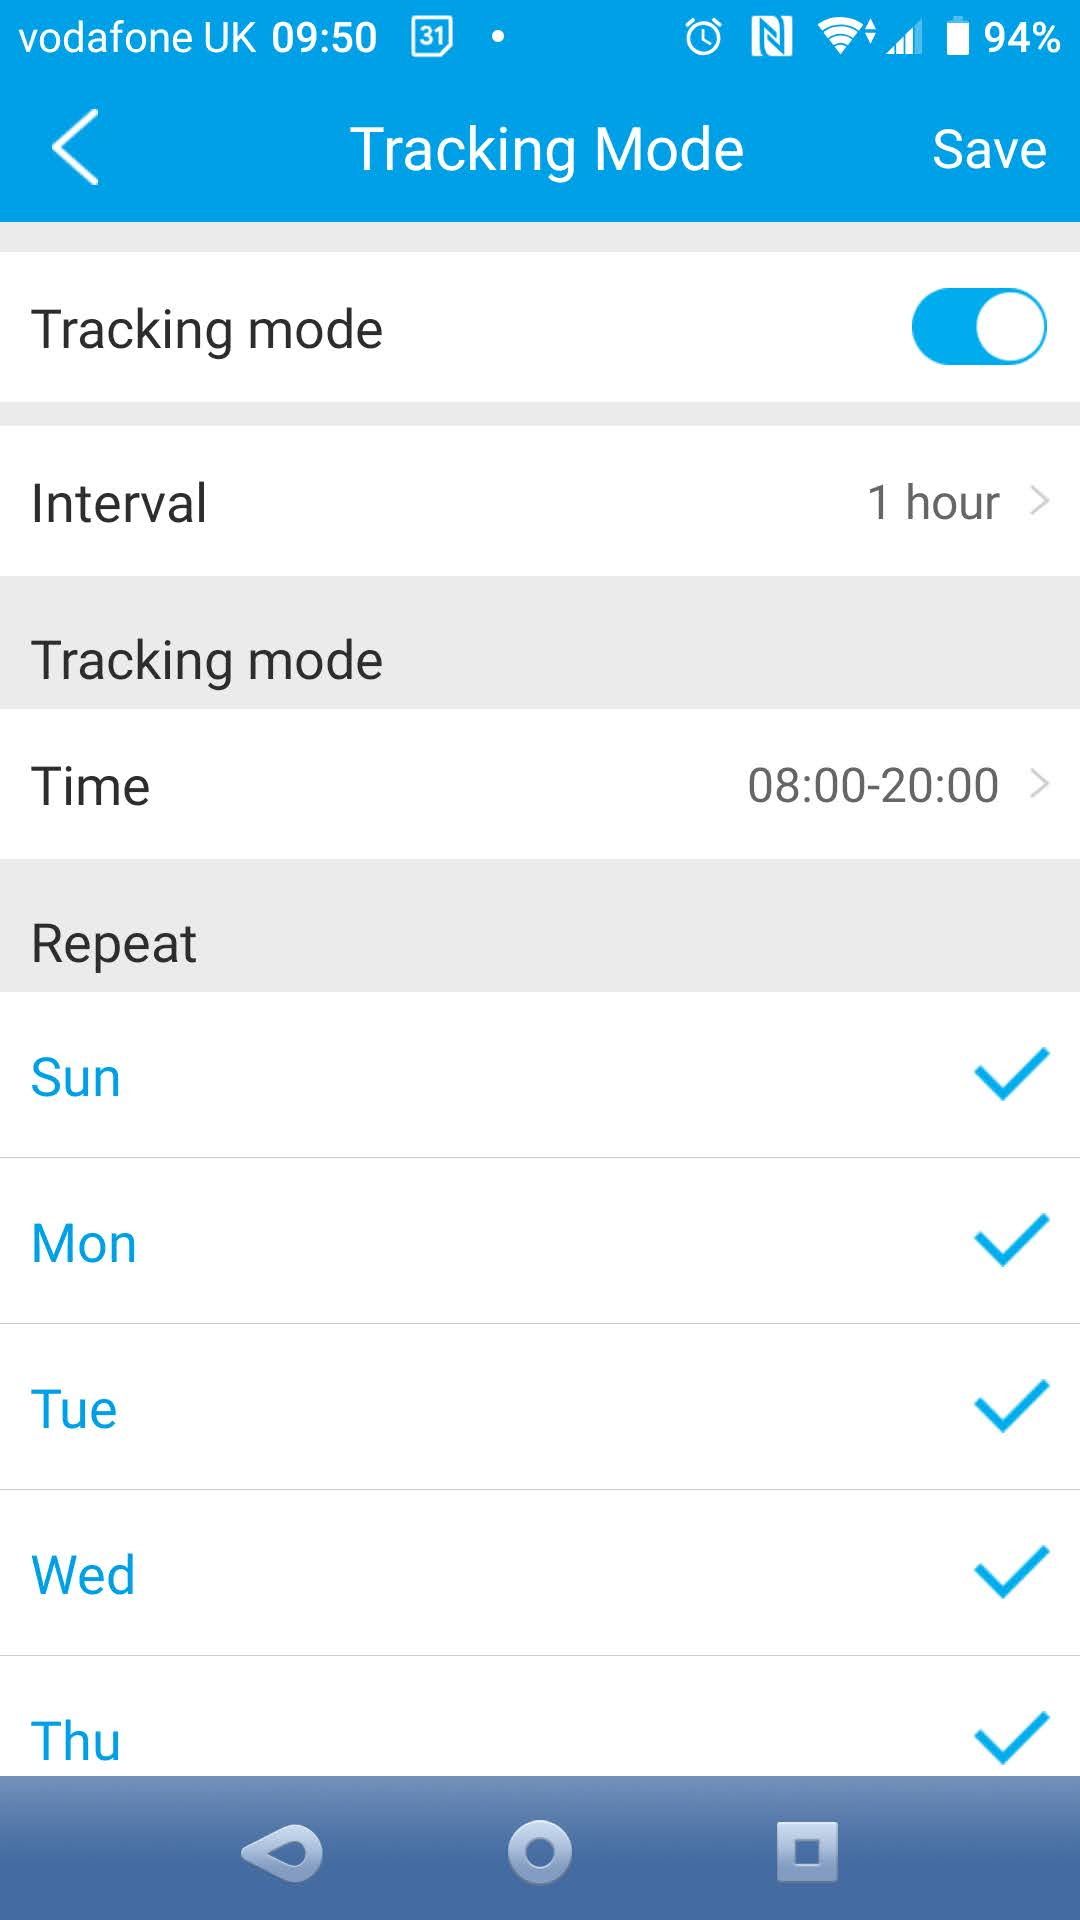 Set location tracking schedule on the myFirst Fone R1